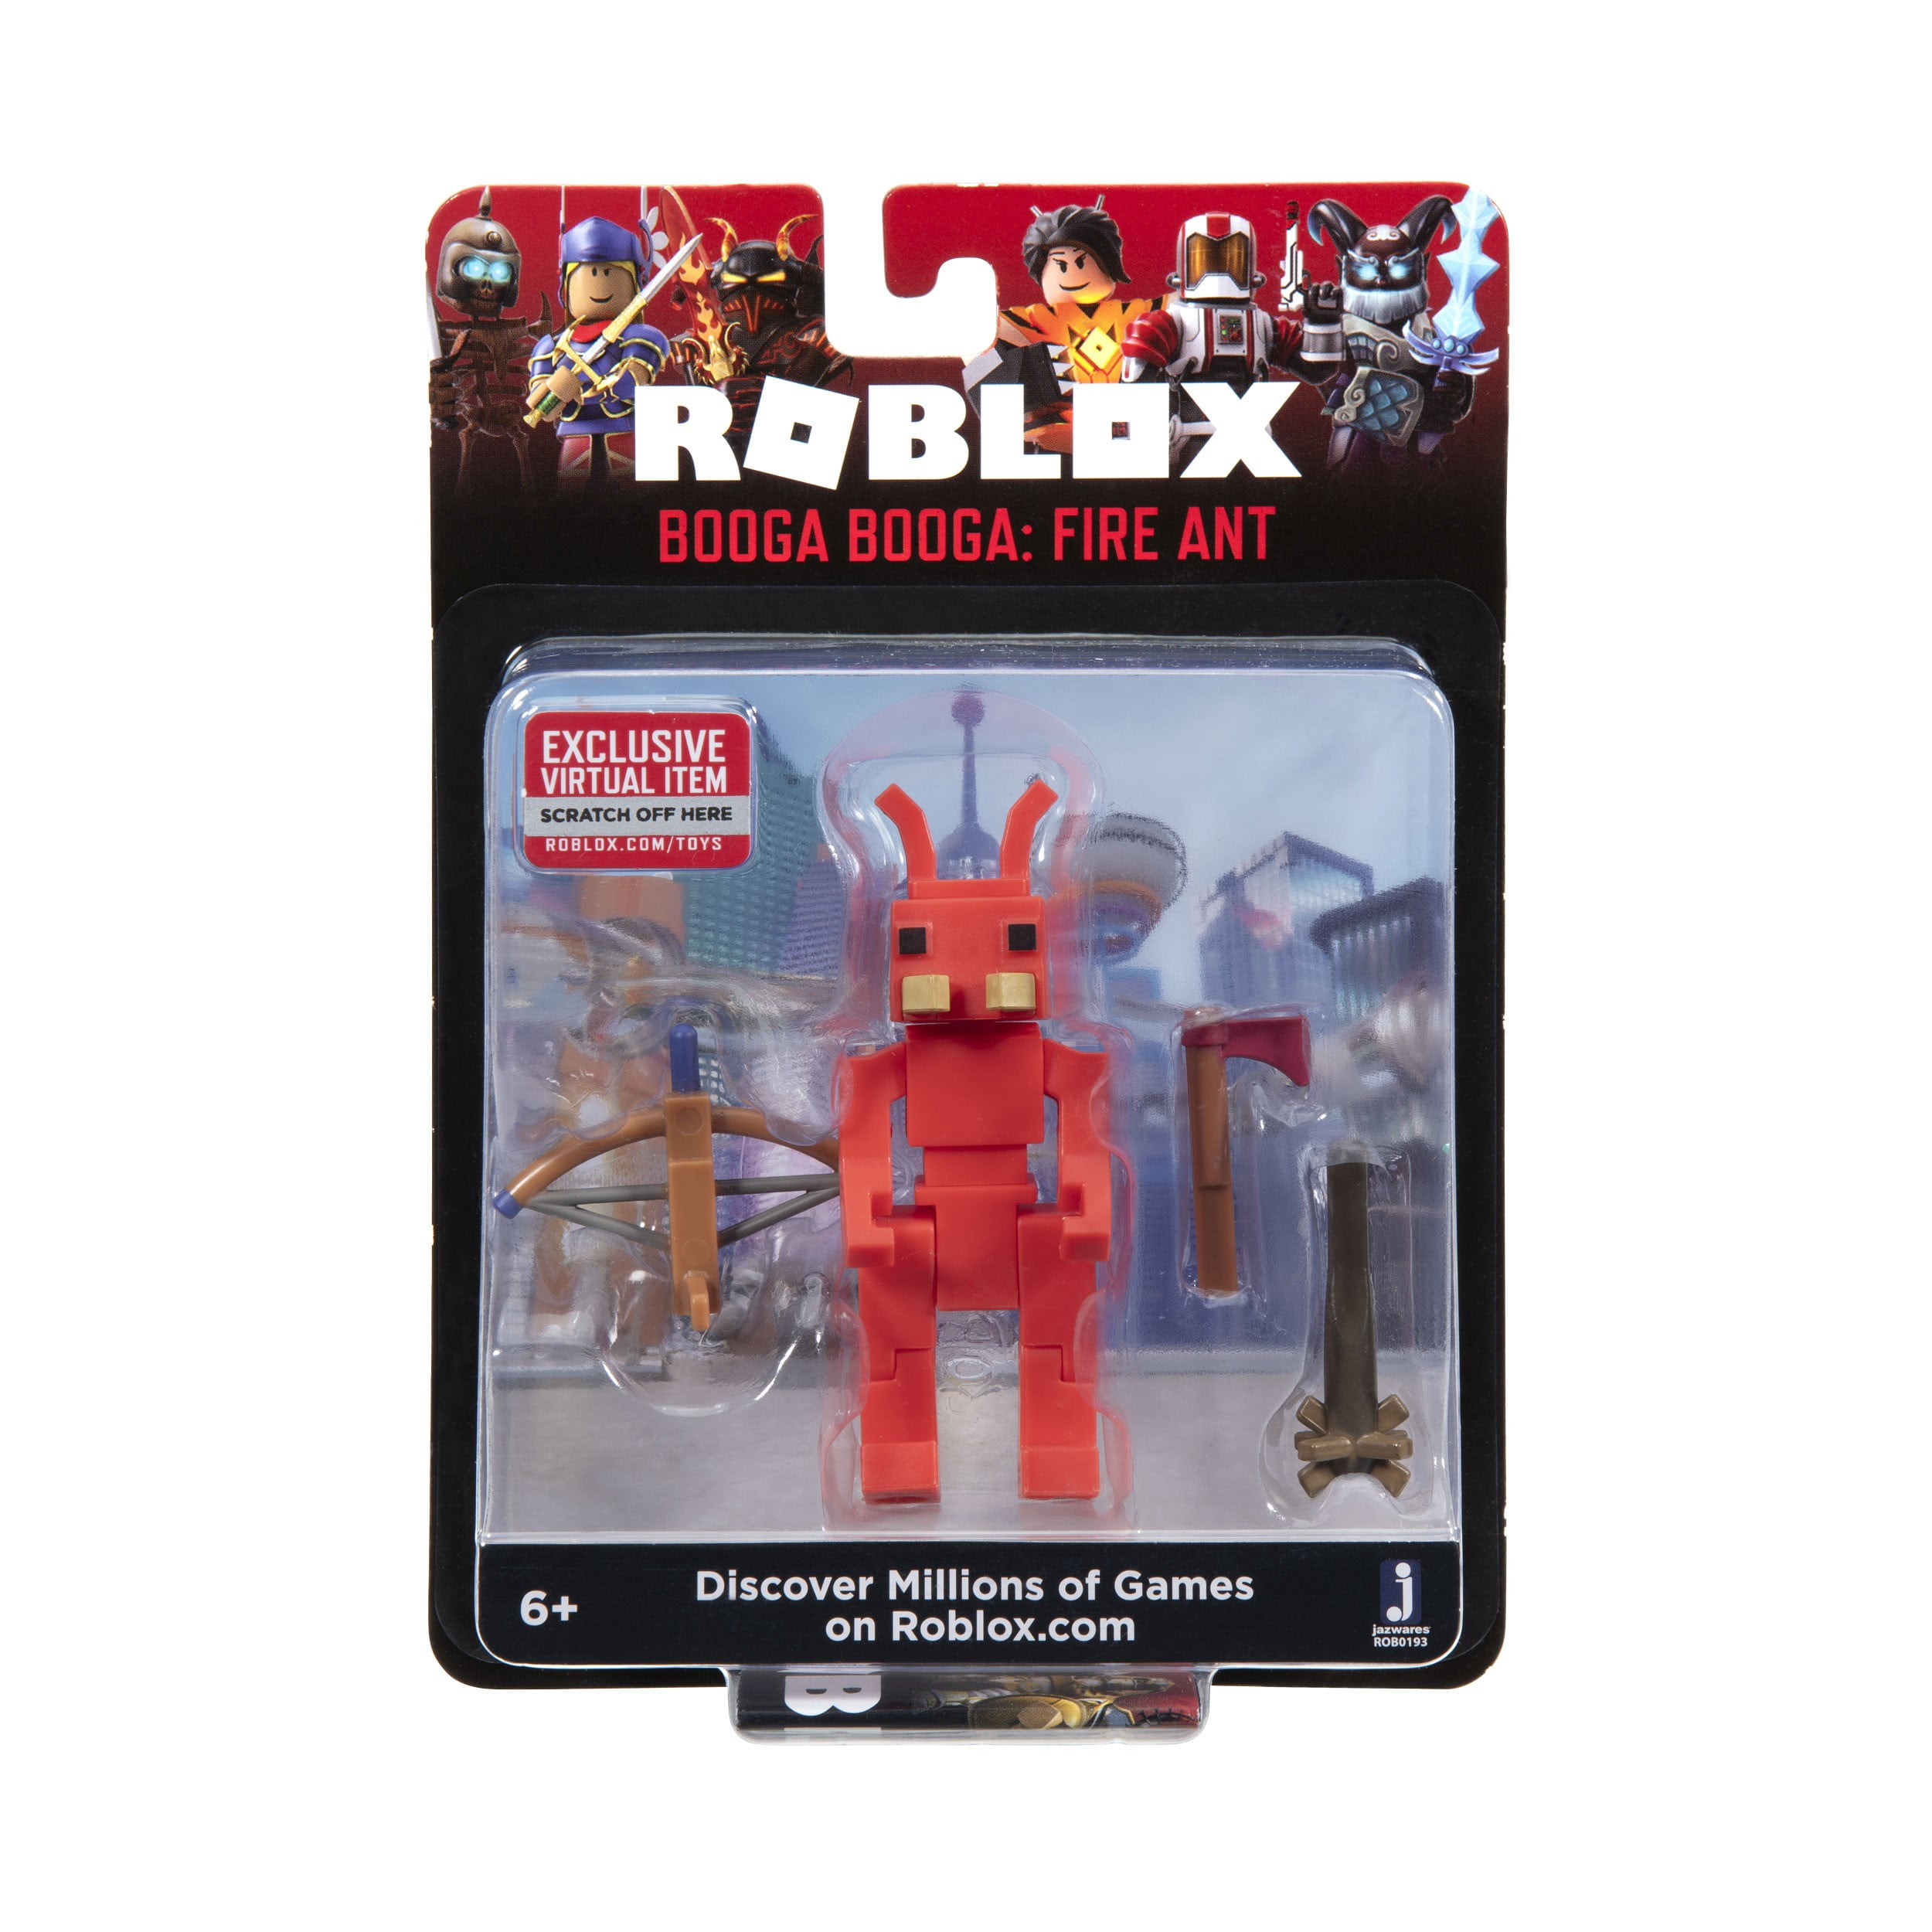 Roblox Action Collection Booga Booga Fire Ant Figure Pack Includes Exclusive Virtual Item Walmart Com Walmart Com - booga booga guide roblox